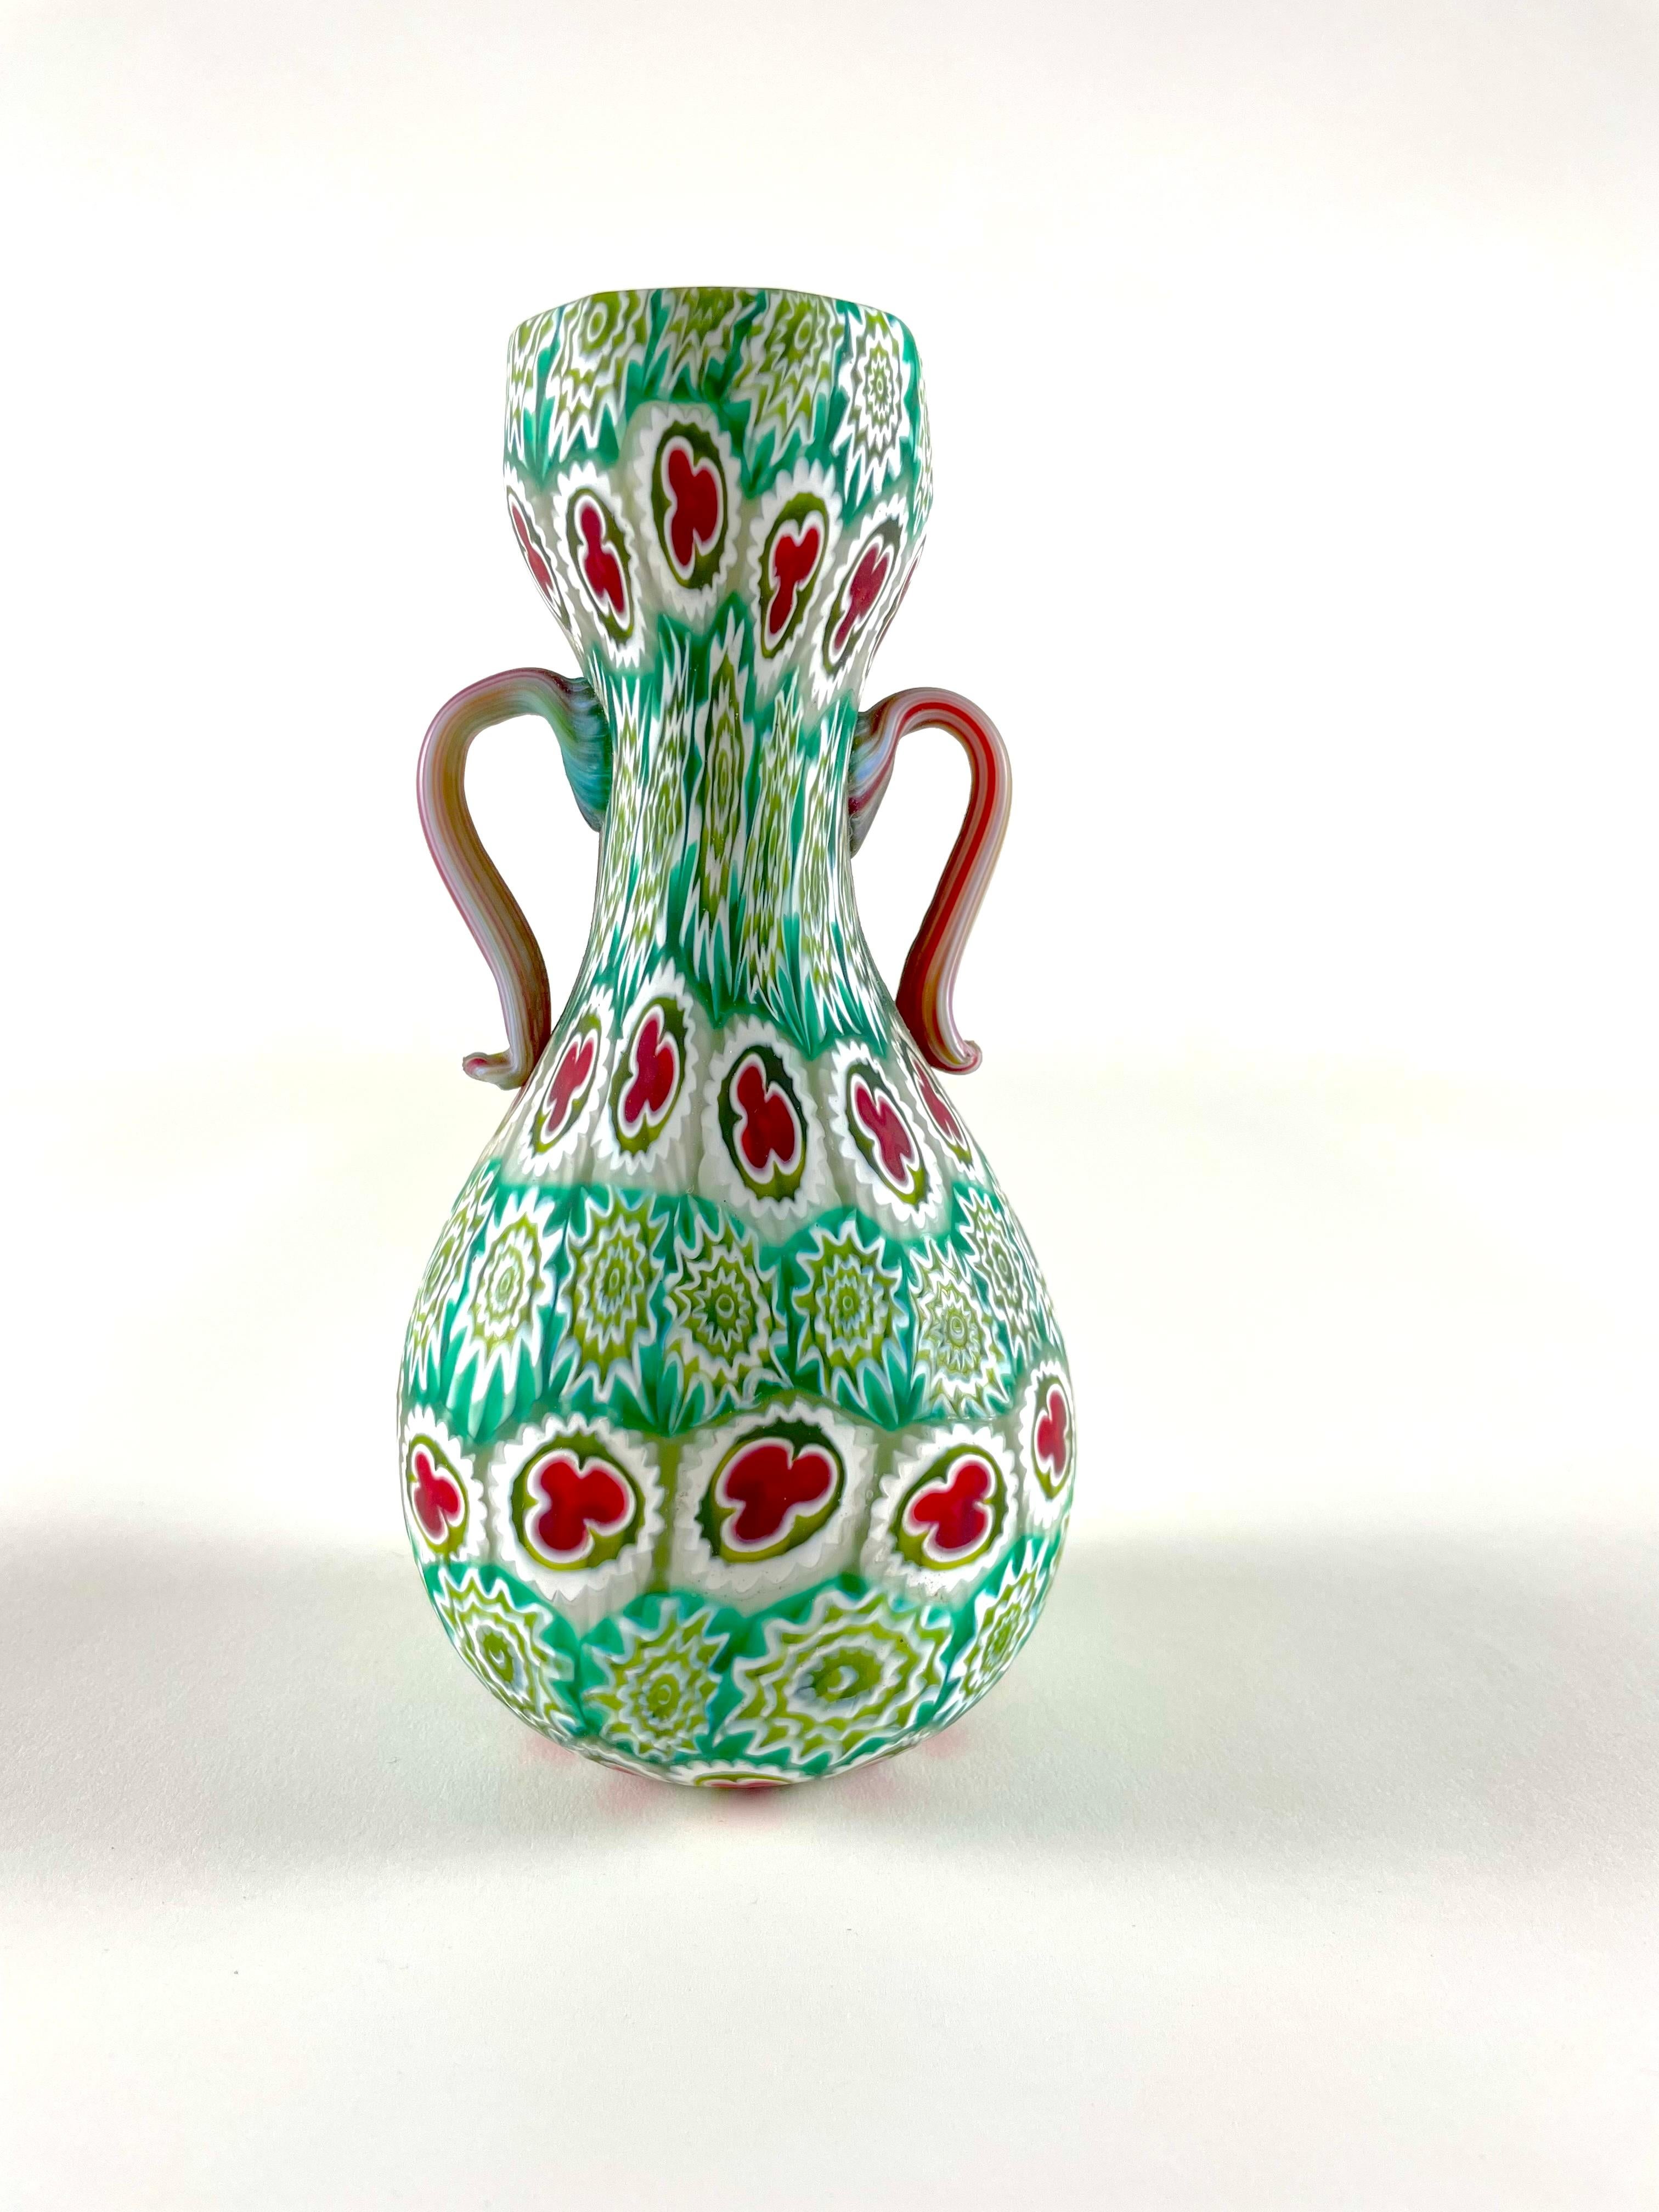 Millefiori Murrina vase by Fratelli Toso. This classic design hails from the '50s and showcases the true craftsmanship that made Fratelli Toso famous. Each piece is meticulously crafted using the murrina technique, making it a collectible vintage